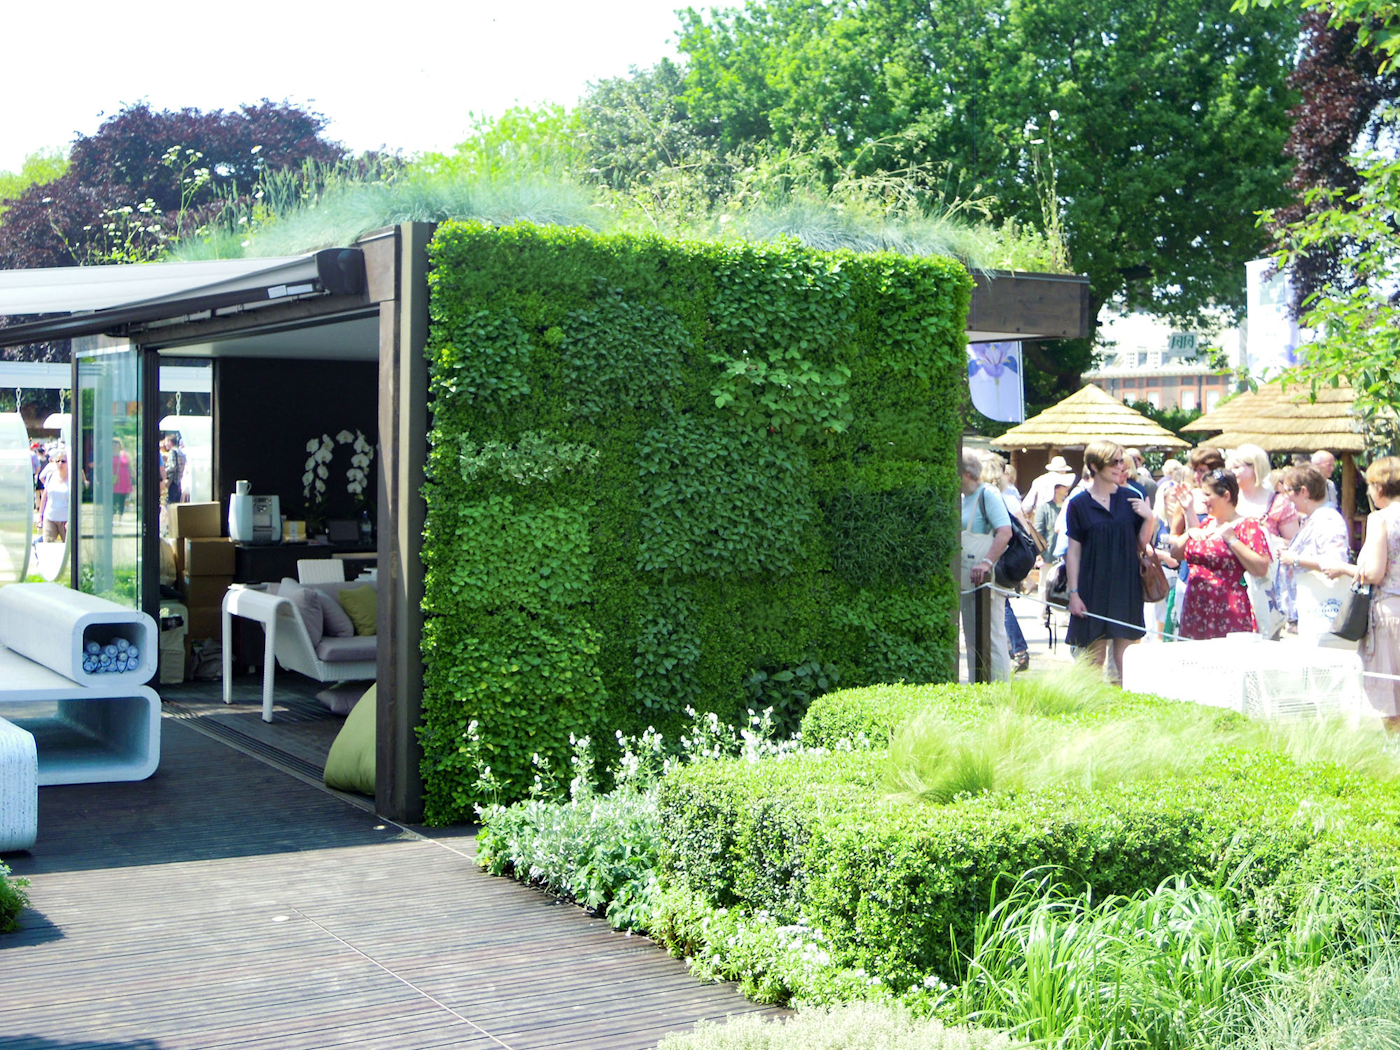 Living Wall and Ground Landscaping at Chelsea Flower Show